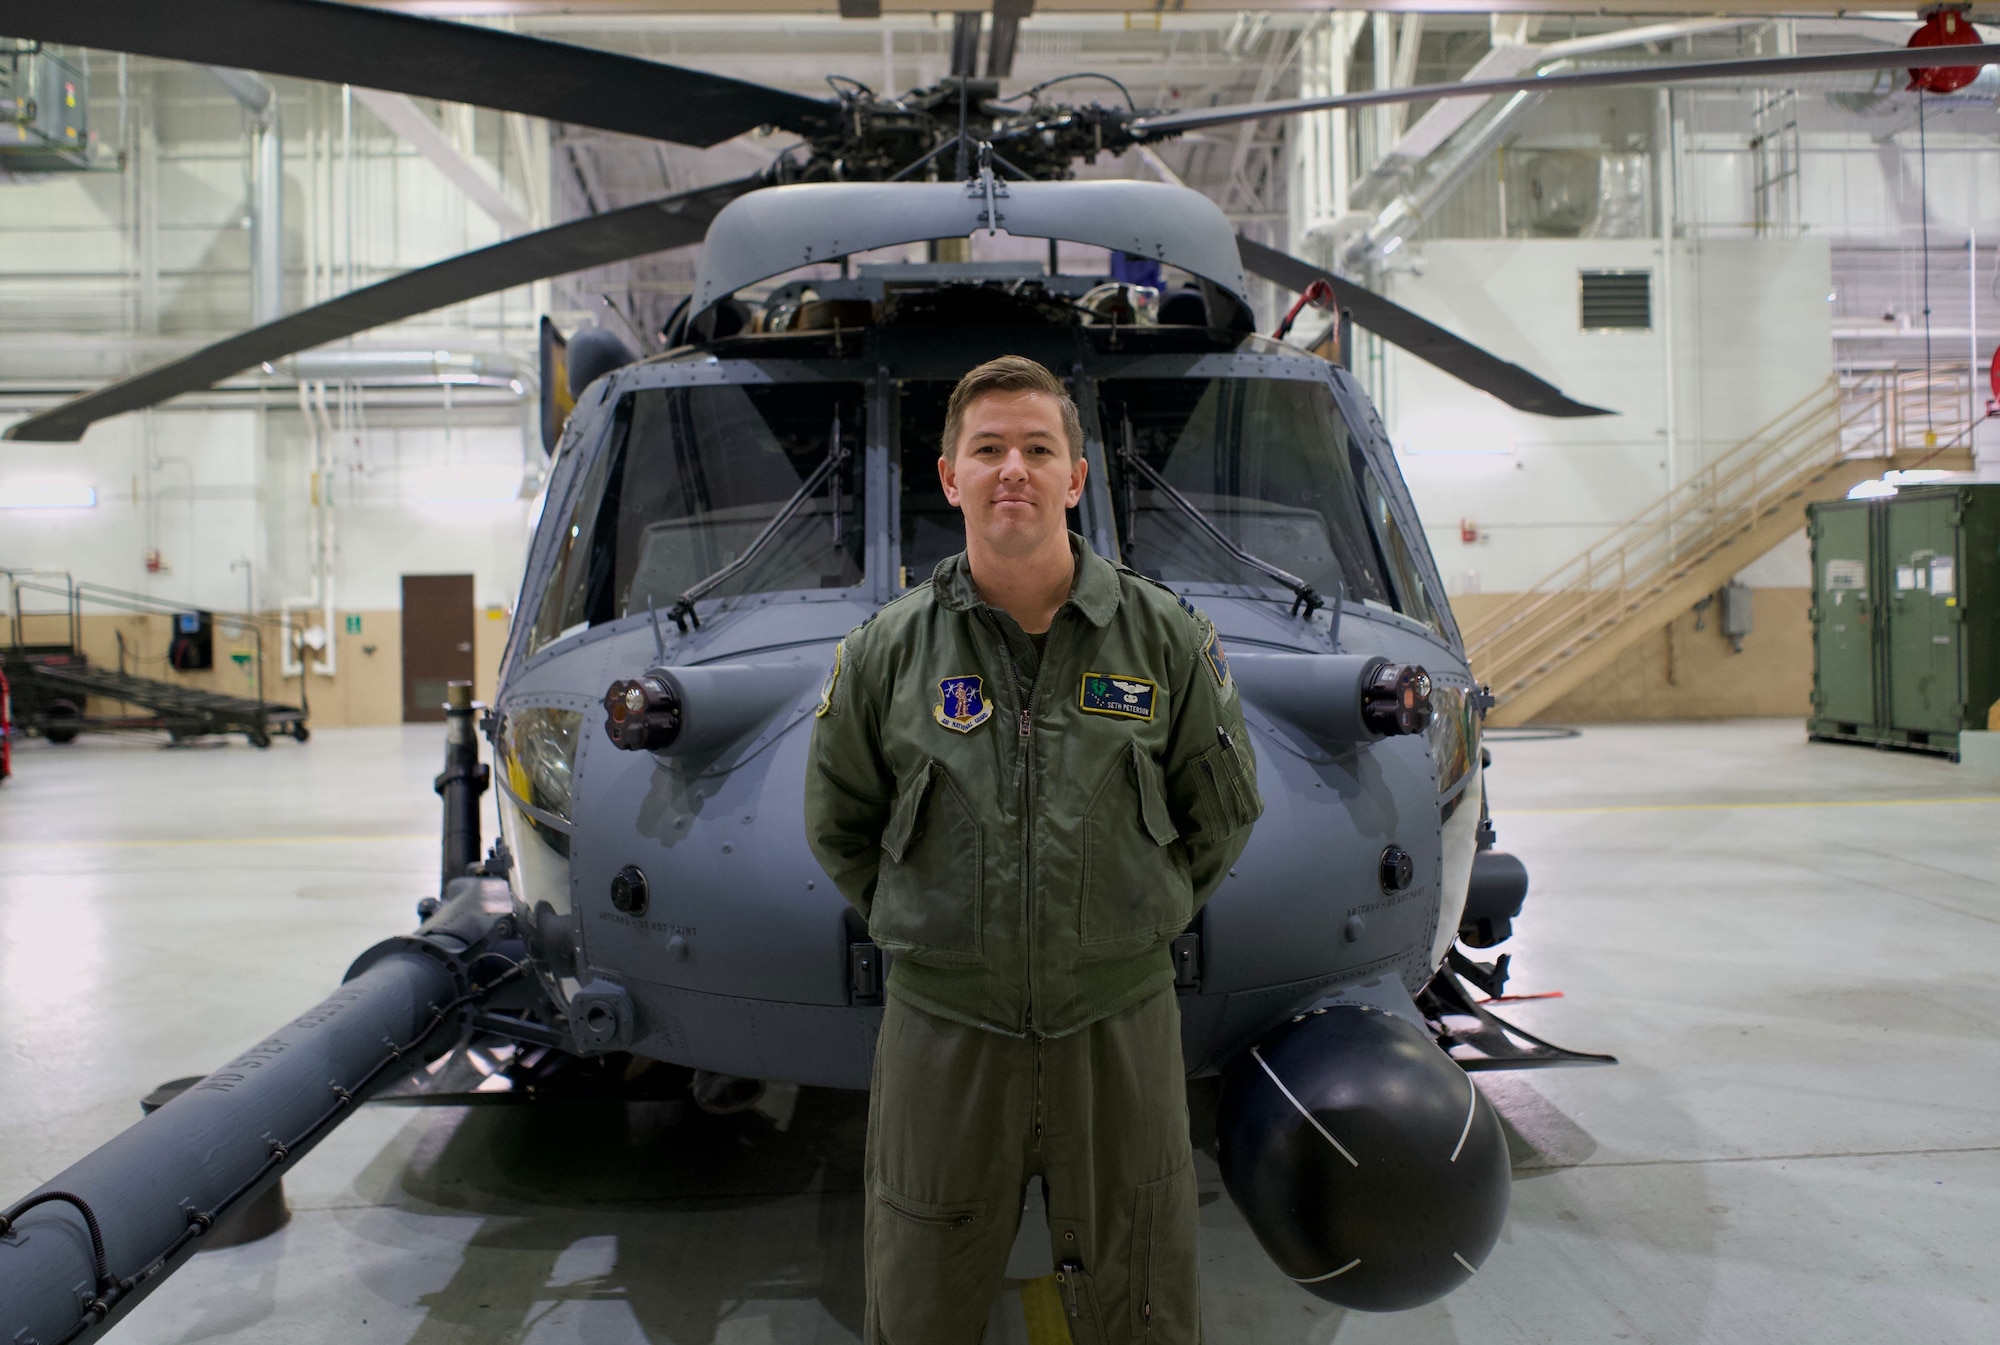 U.S. Air Force Captain Seth Peterson, a helicopter pilot assigned to the 210th Rescue Squadron, Joint Base Elemendorf-Richardson, Alaska, stands in front of an HH-60G Pave Hawk helicopter in a hanger at JBER Nov. 3, 2021. Capt. Peterson commissioned as an U.S. Air Force officer after serving as a U.S. Marine with the 4th Battalion.